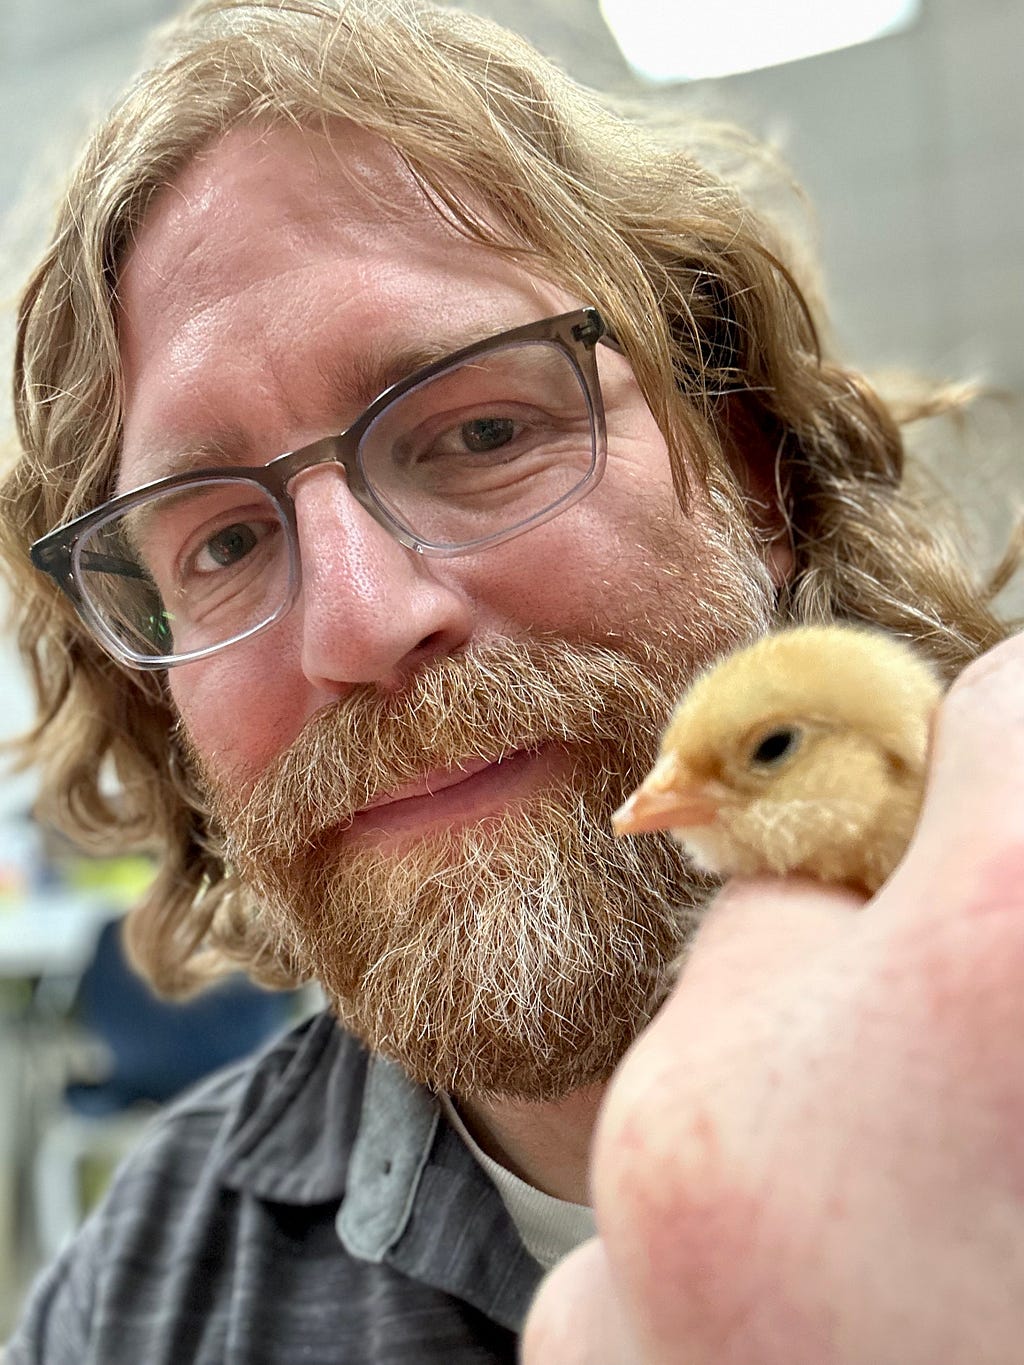 Selfie of a man with shoulder-length red hair and a beard, with a smattering of white hairs throughout. He is wearing brown glasses and looking at his hand, which is in the foreground of the camera. In his hand is a baby chicken, with only its fluffy yellow head visible. The background is a blurred classroom.